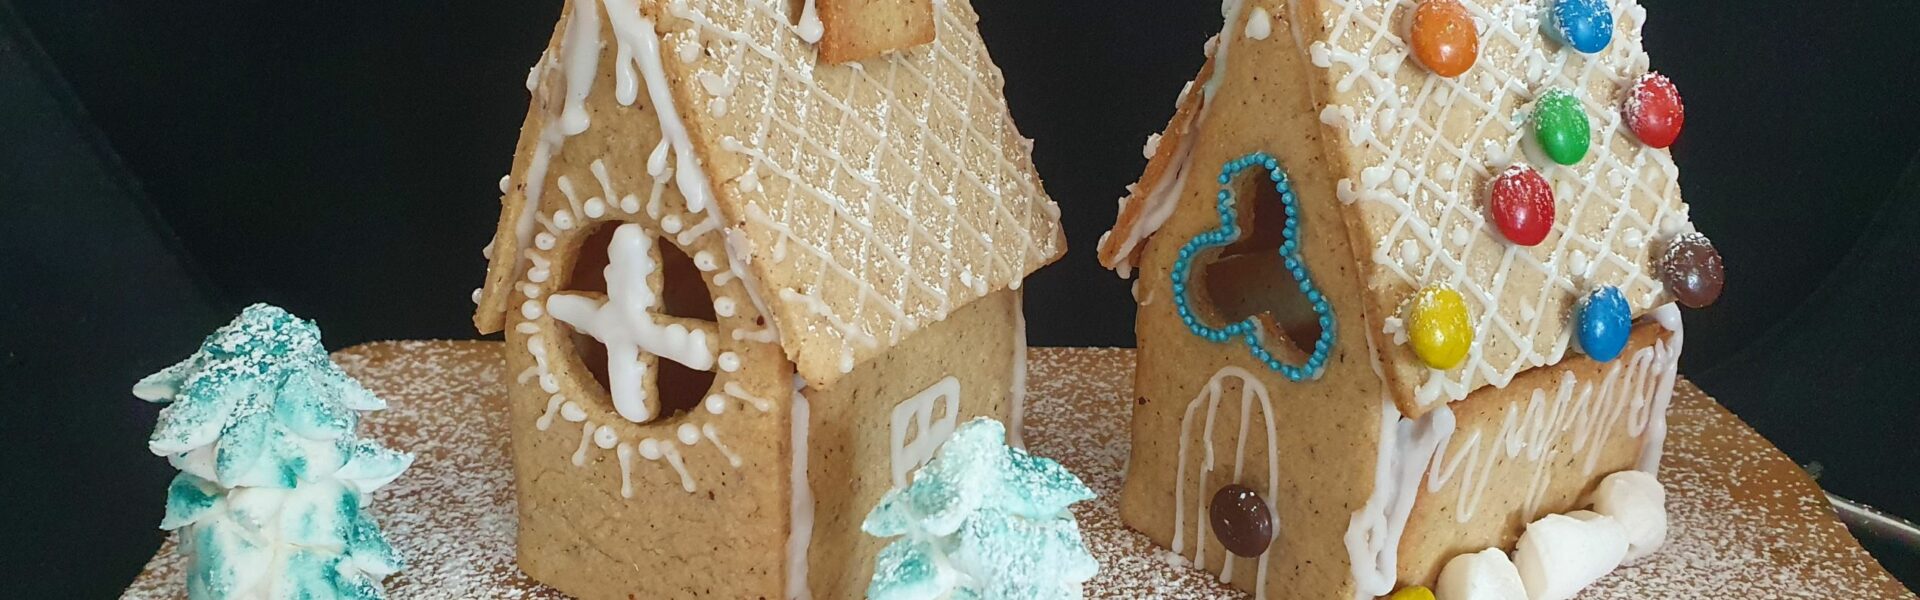 Gingerbread house easy for kids to do Christmas activity Christmas fun MomMadeMoments